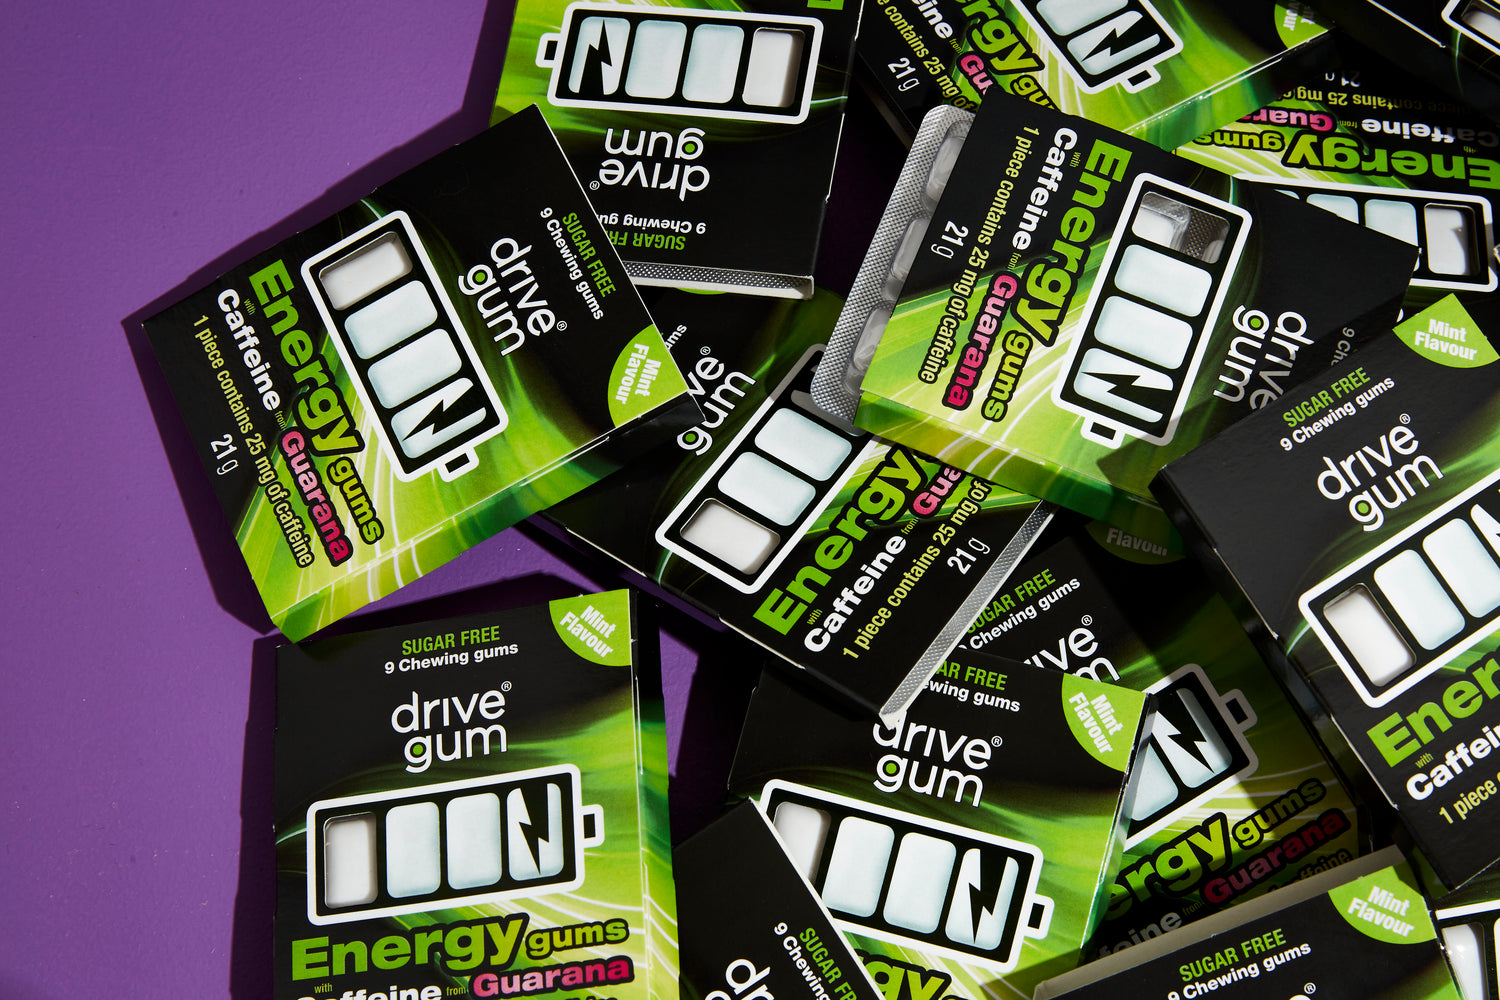 Pile of caffeinated energy chewing gum